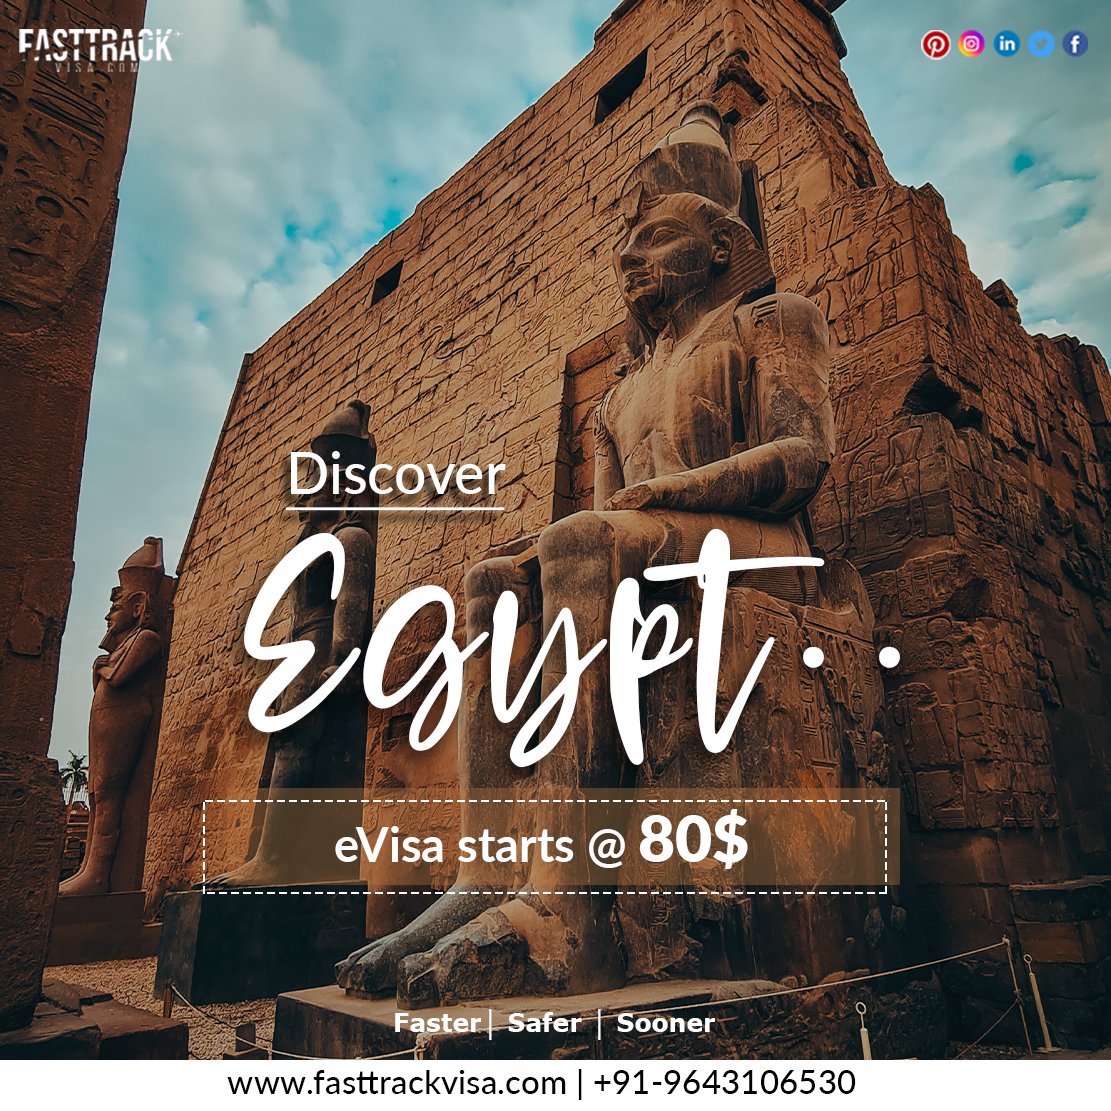 Get to revel in the iconic city of first civilization along with a number of fun-filled avocations to indulge in😍
Plan a trip to Egypt with your family & friends and let us worry about your visas.😍
Go Fasttrack! ✈️
#fasttrackvisa #gofasttrack #evisa #egyptvisa #discoveregypt